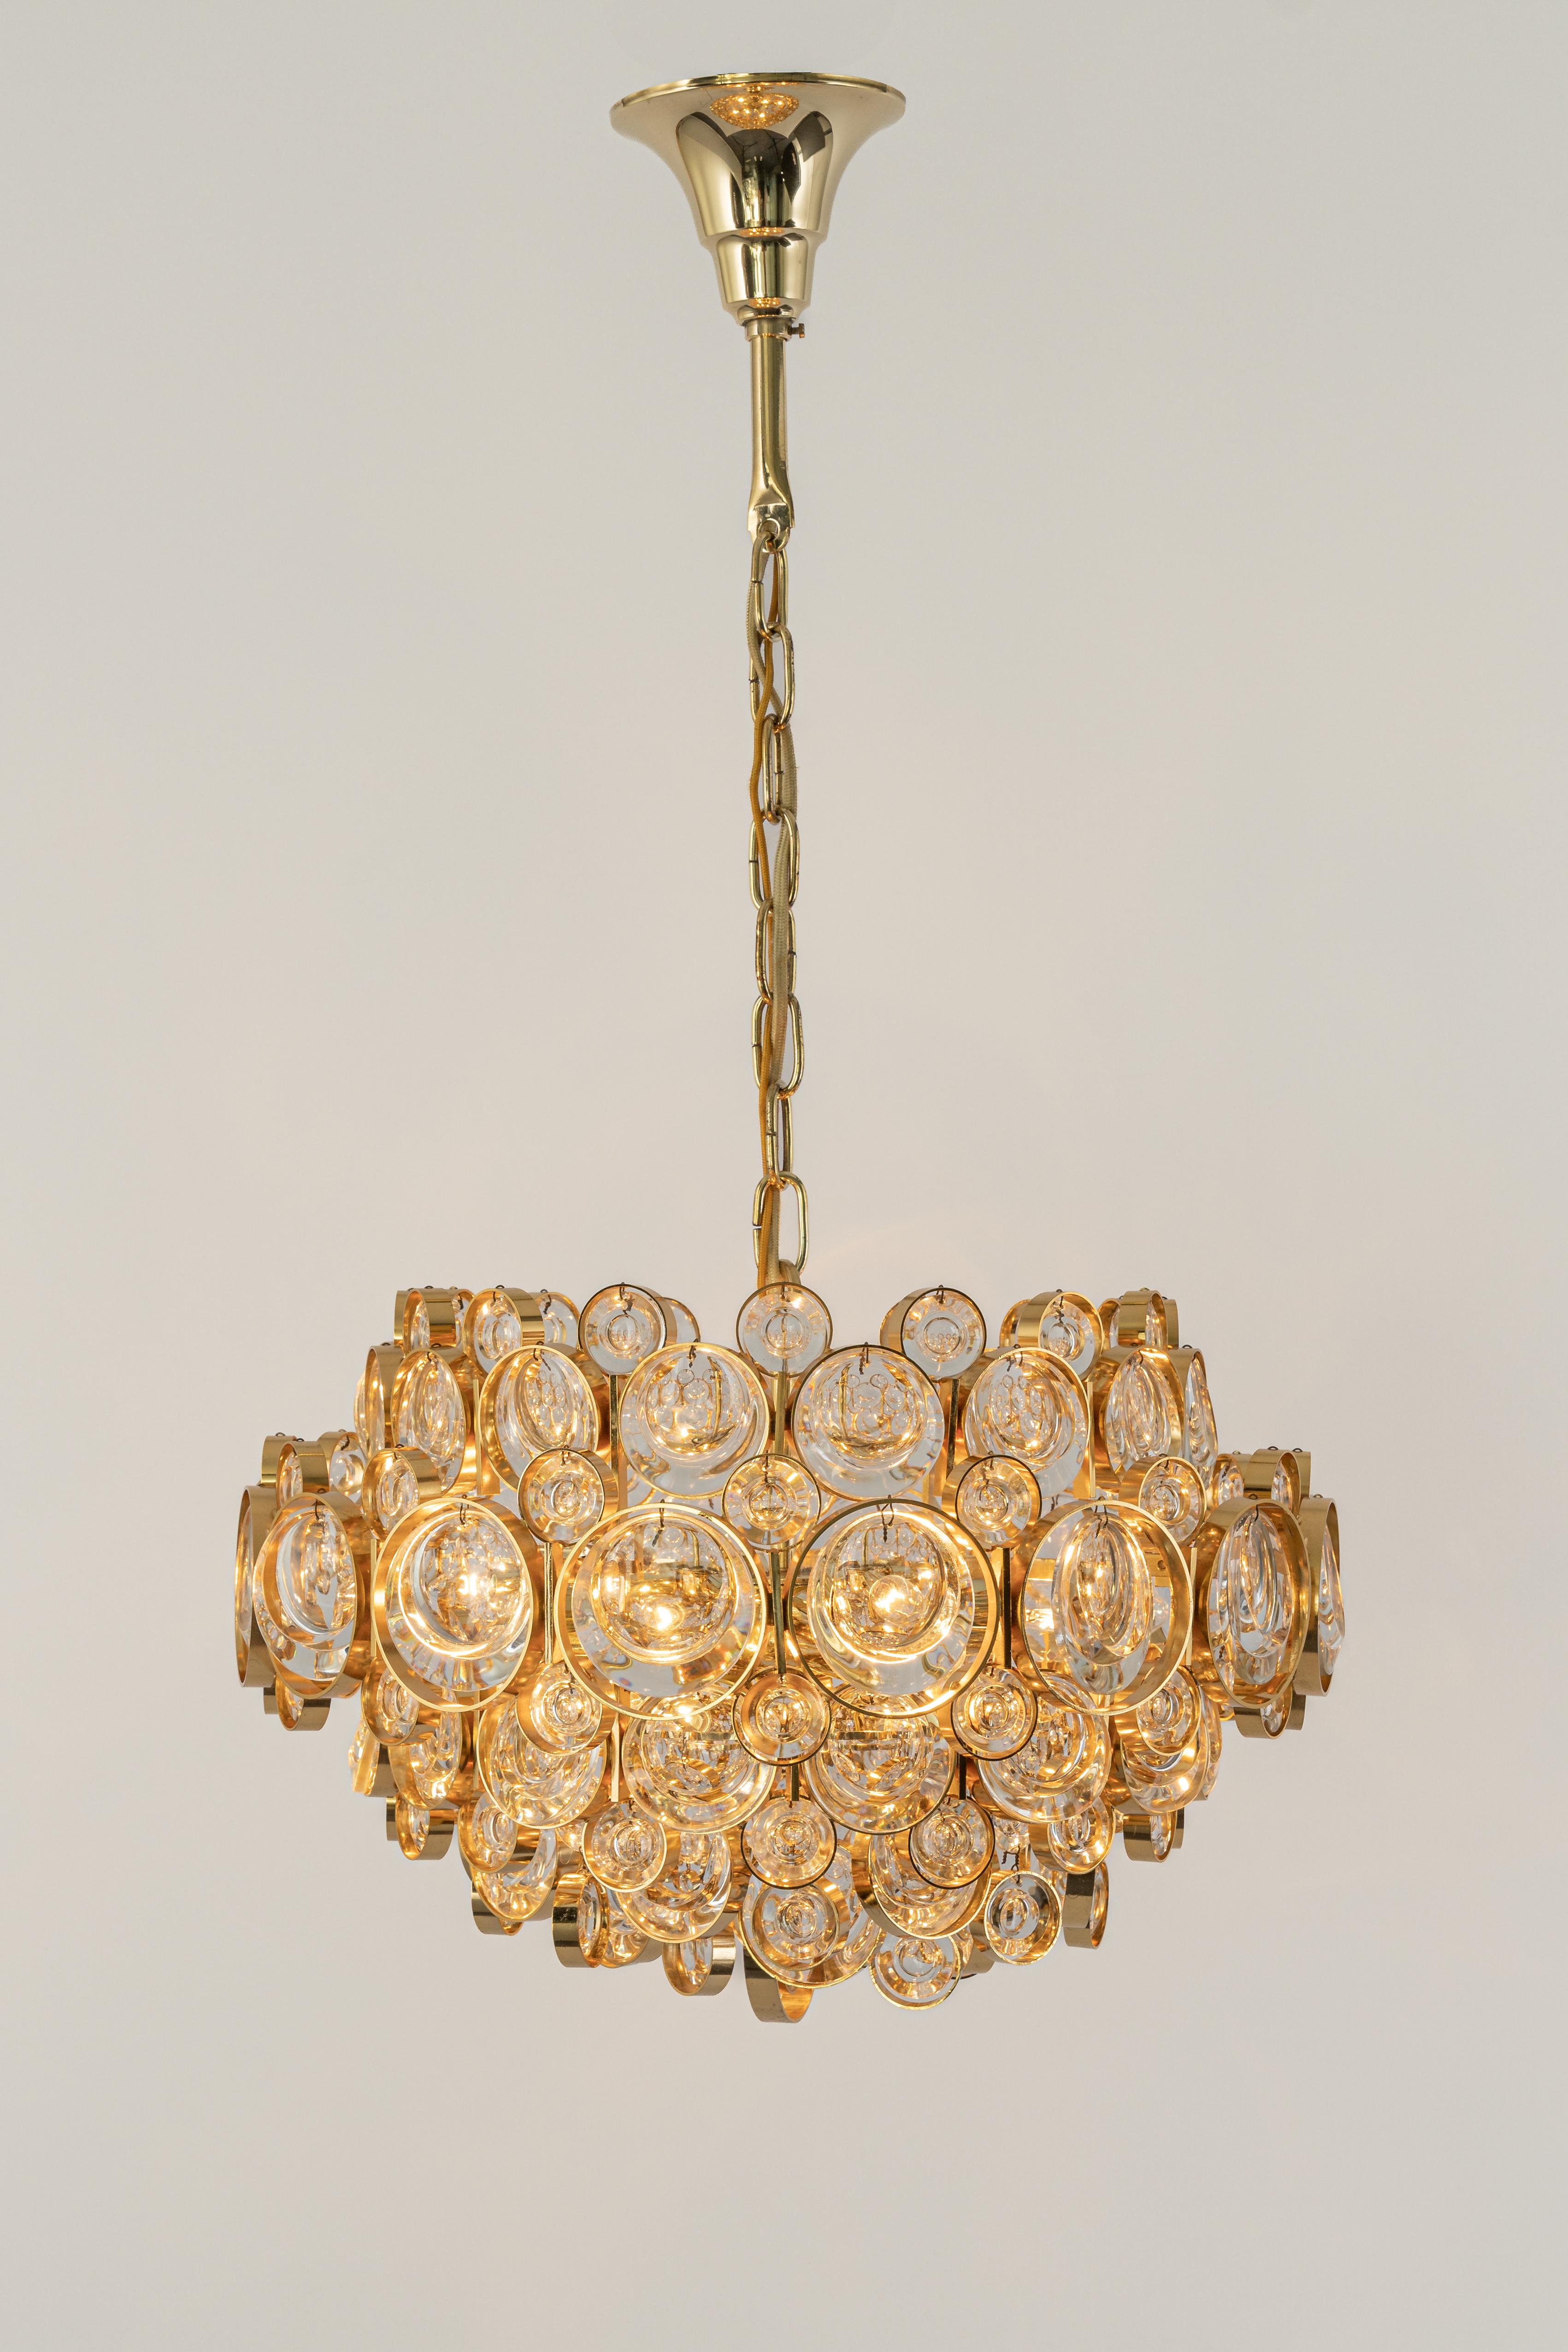 Gold Plate Stunning Gilt Brass Chandelier, Sciolari Design Style by Palwa, Germany, 1970s For Sale